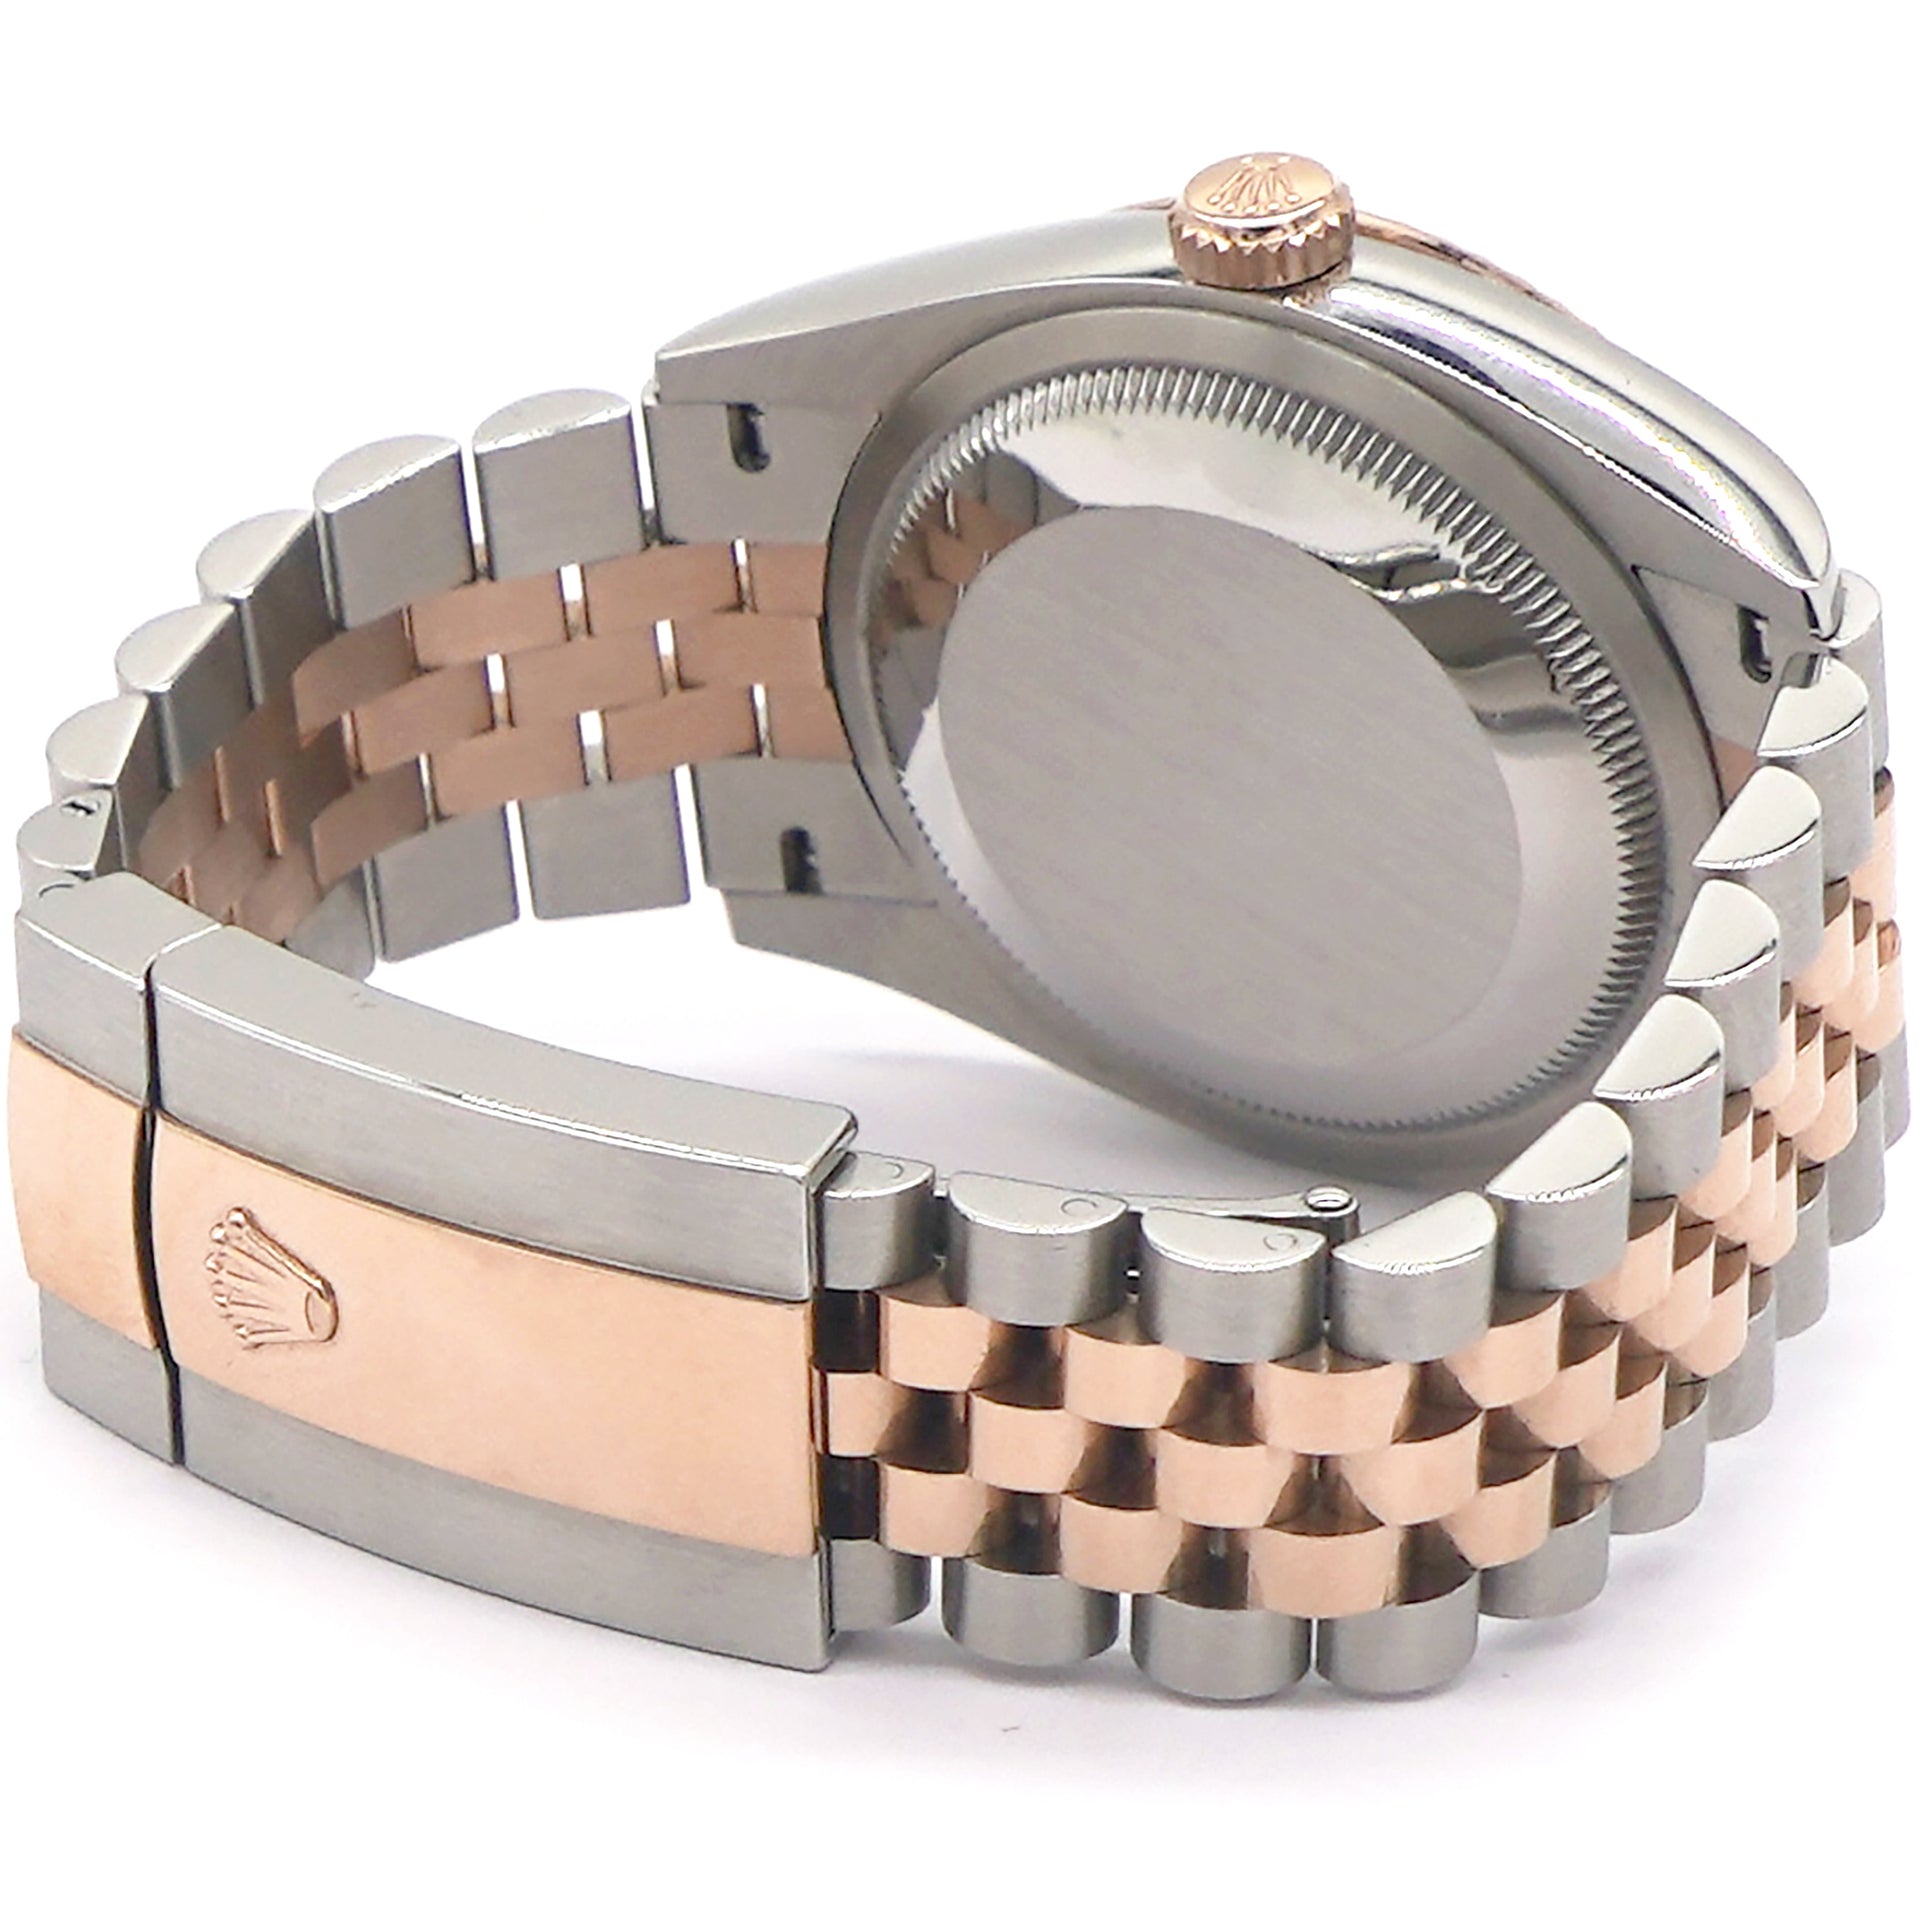 Datejust Oystersteel and Rose Gold 36mm 126231